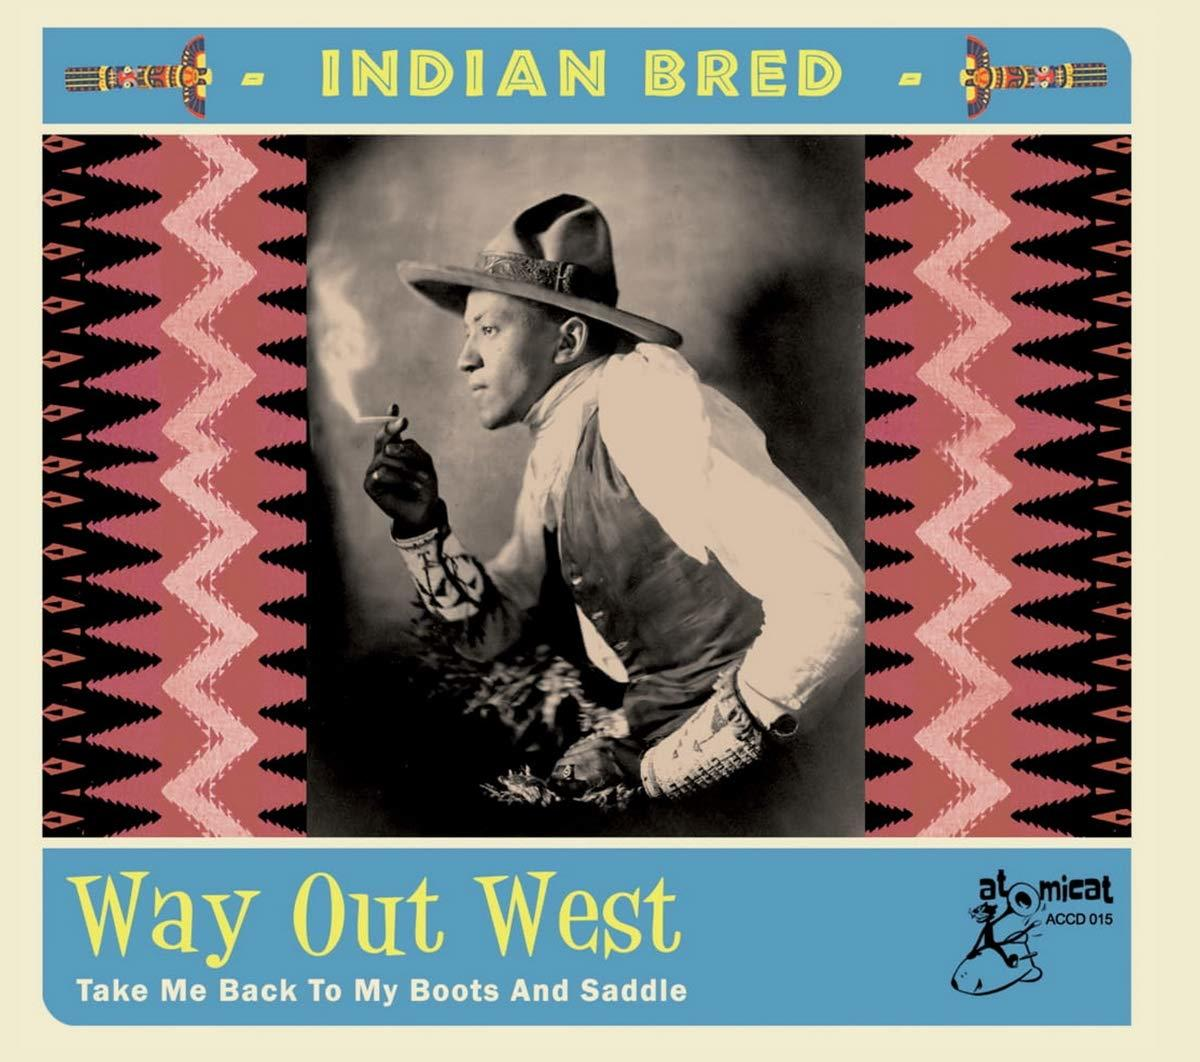 VARIOUS - Out Indian (CD) - West Bred-Way